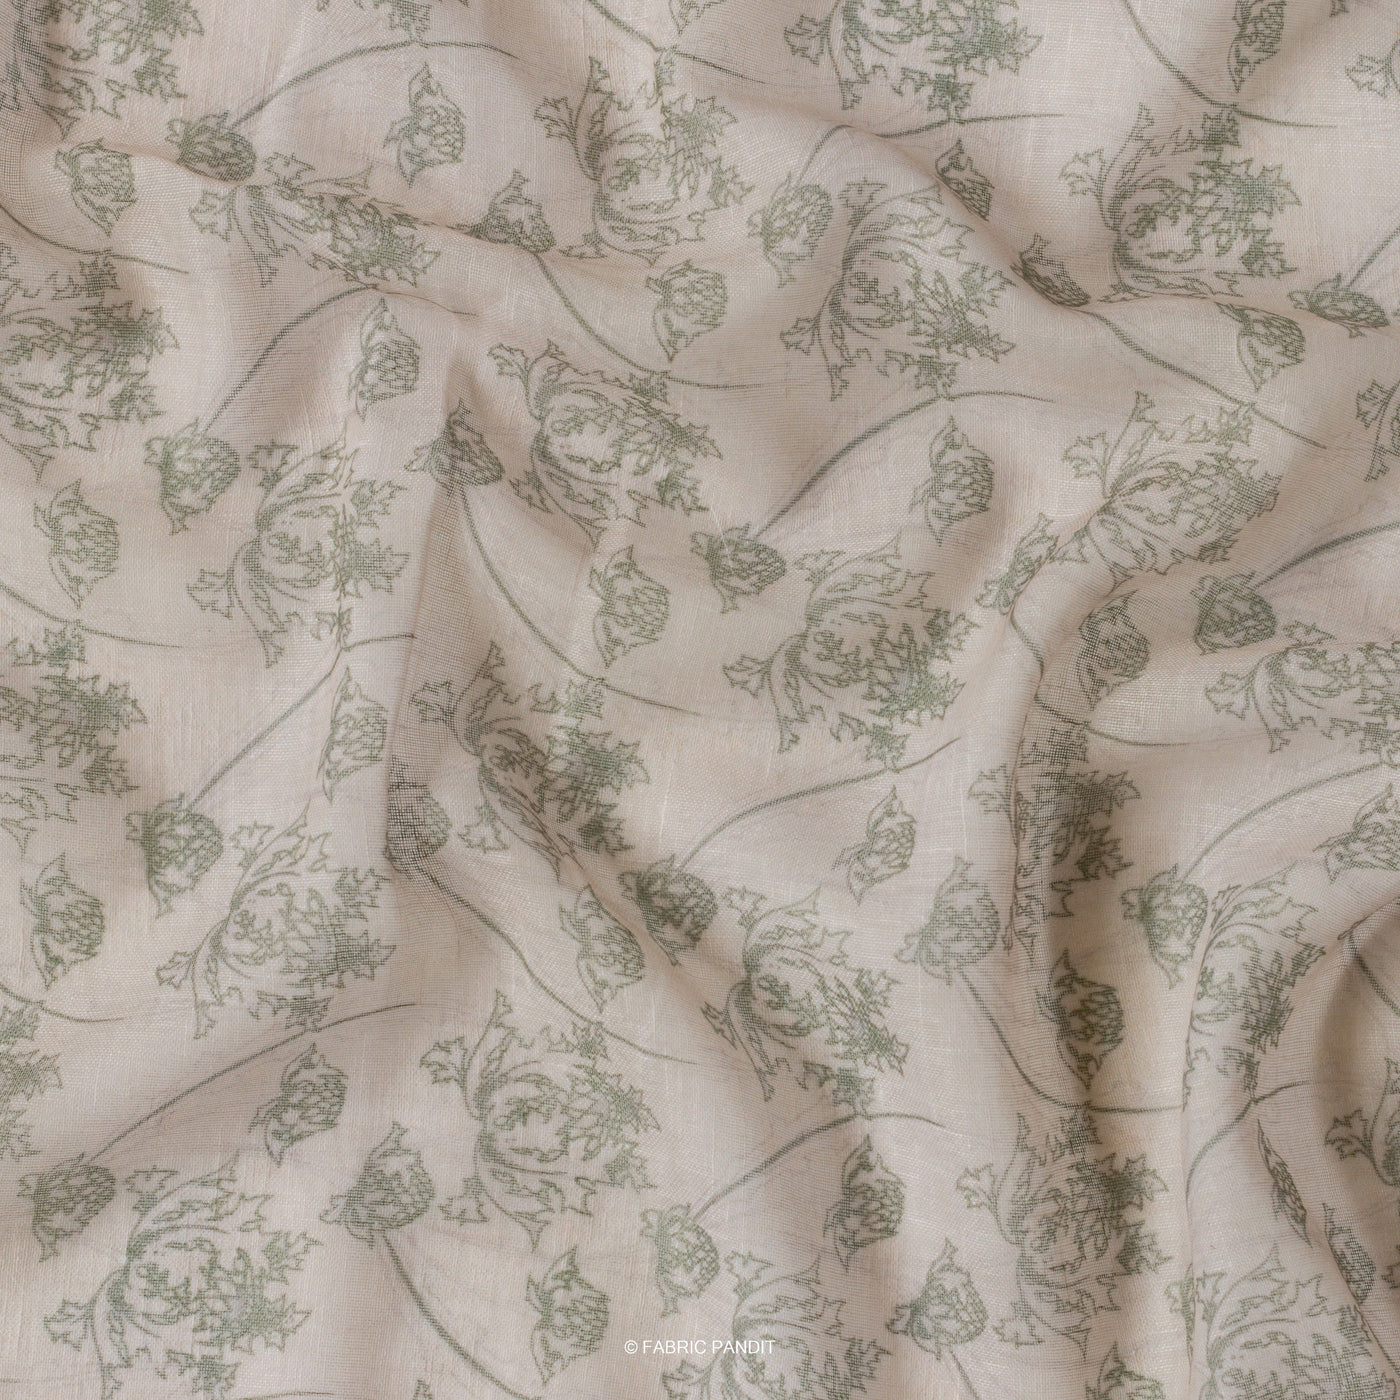 Fabric Pandit Fabric Dusty Beige And Green Dandelions Digital Printed Poly Blend Linen Neps Fabric (Width 44 Inches)